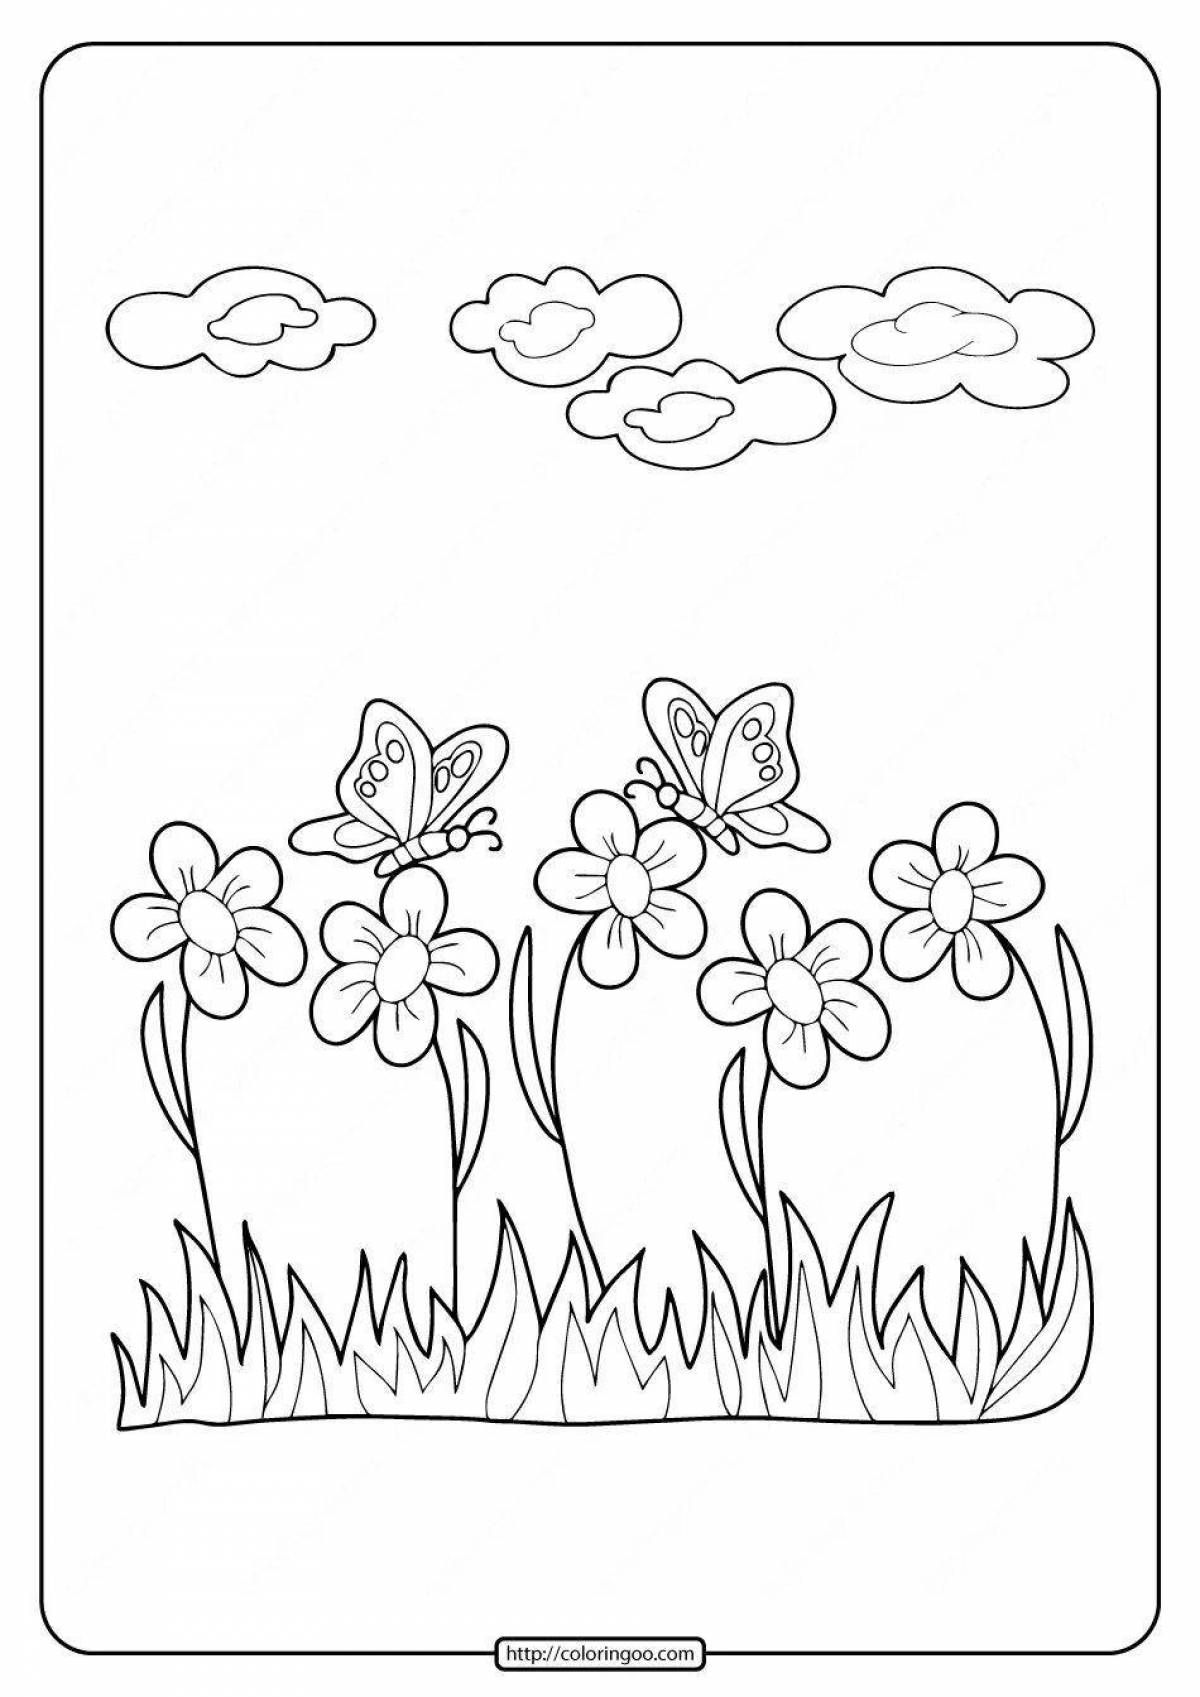 Colourful coloring book for children